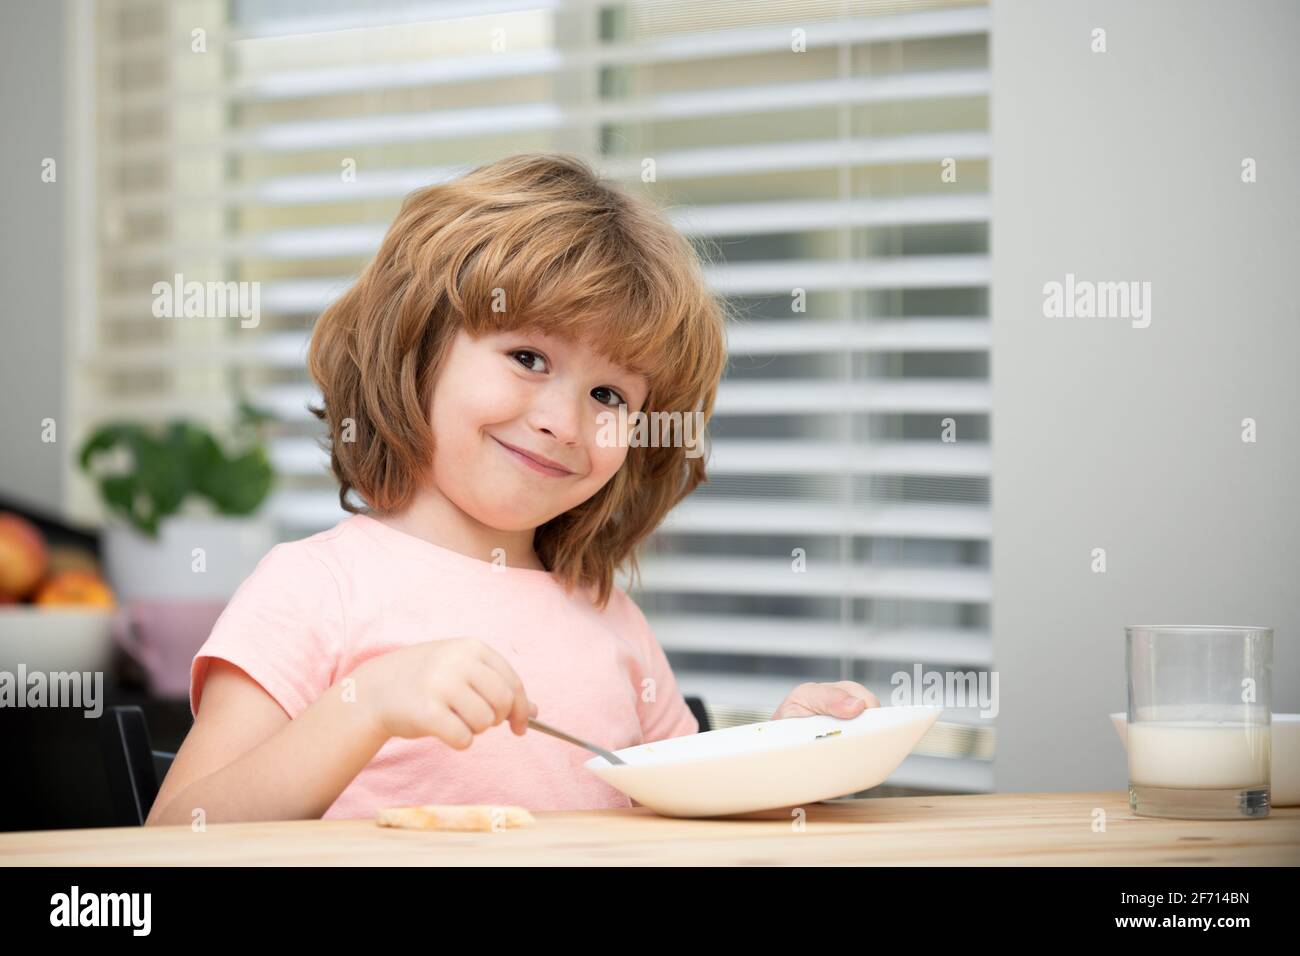 Child eat. Little healthy hungry boy eating soup with spoon. Stock Photo